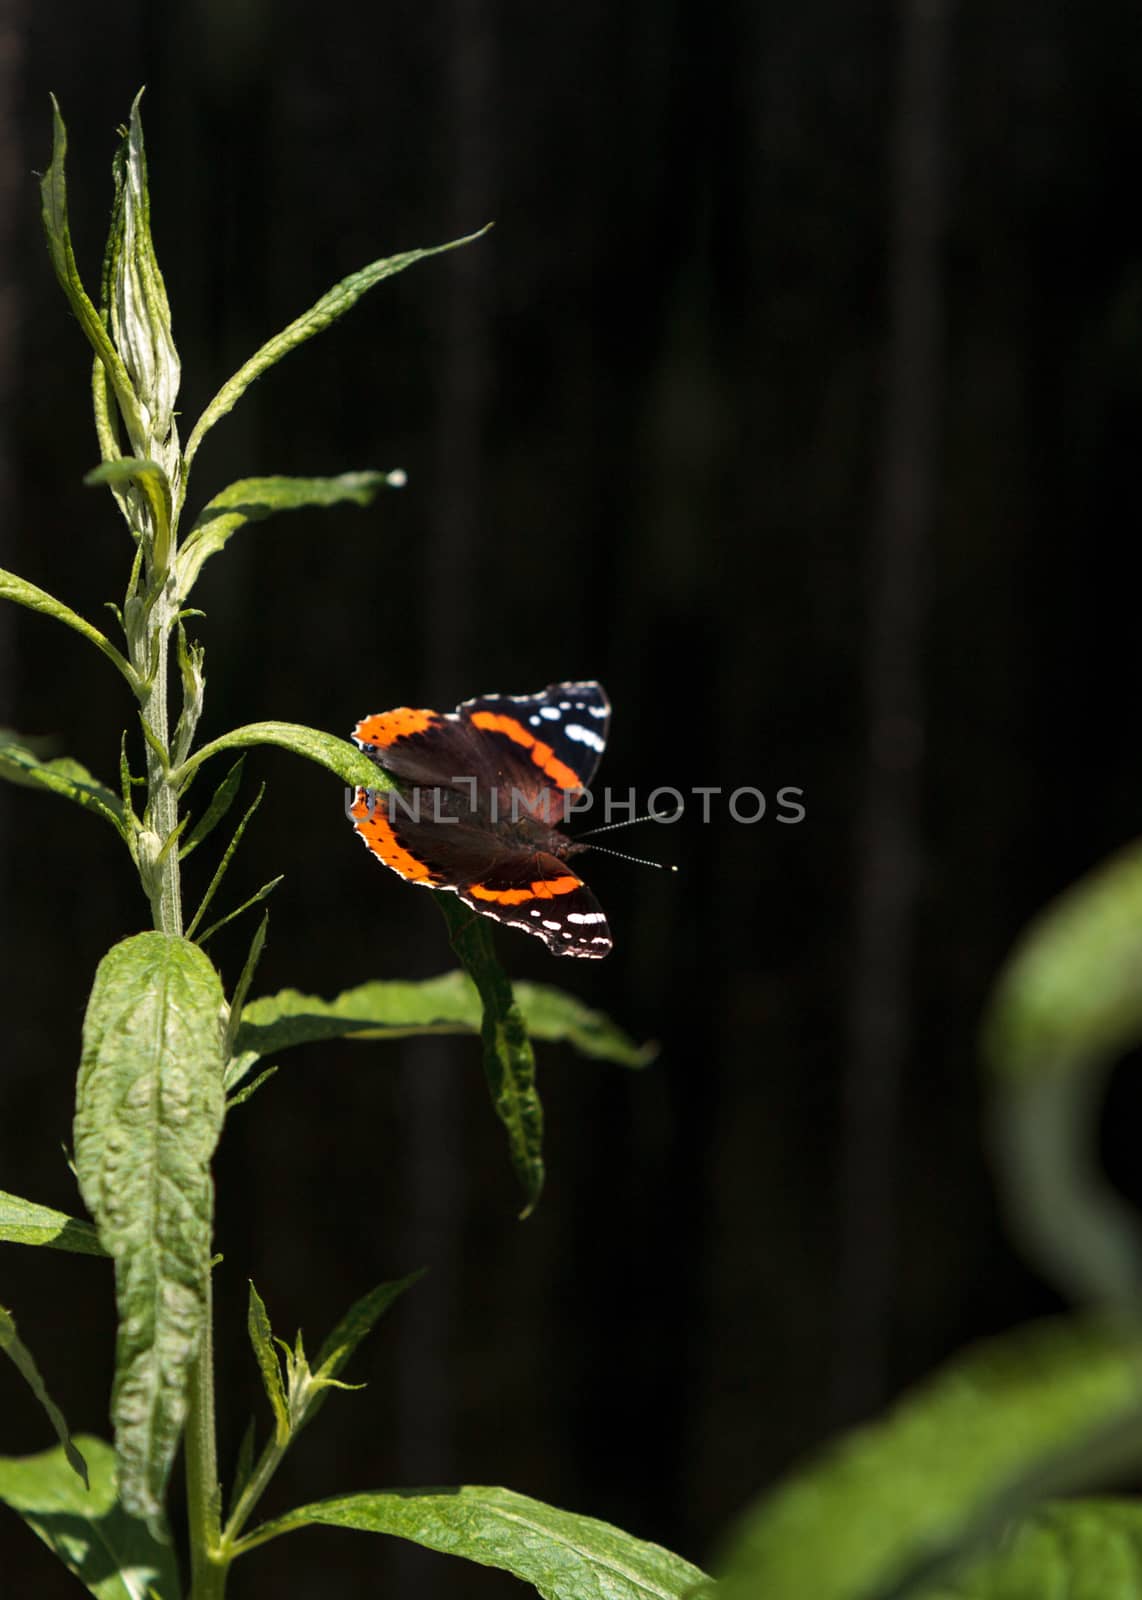 Red admiral butterfly, Vanessa atalanta, in a butterfly garden on a flower in spring in Southern California, USA